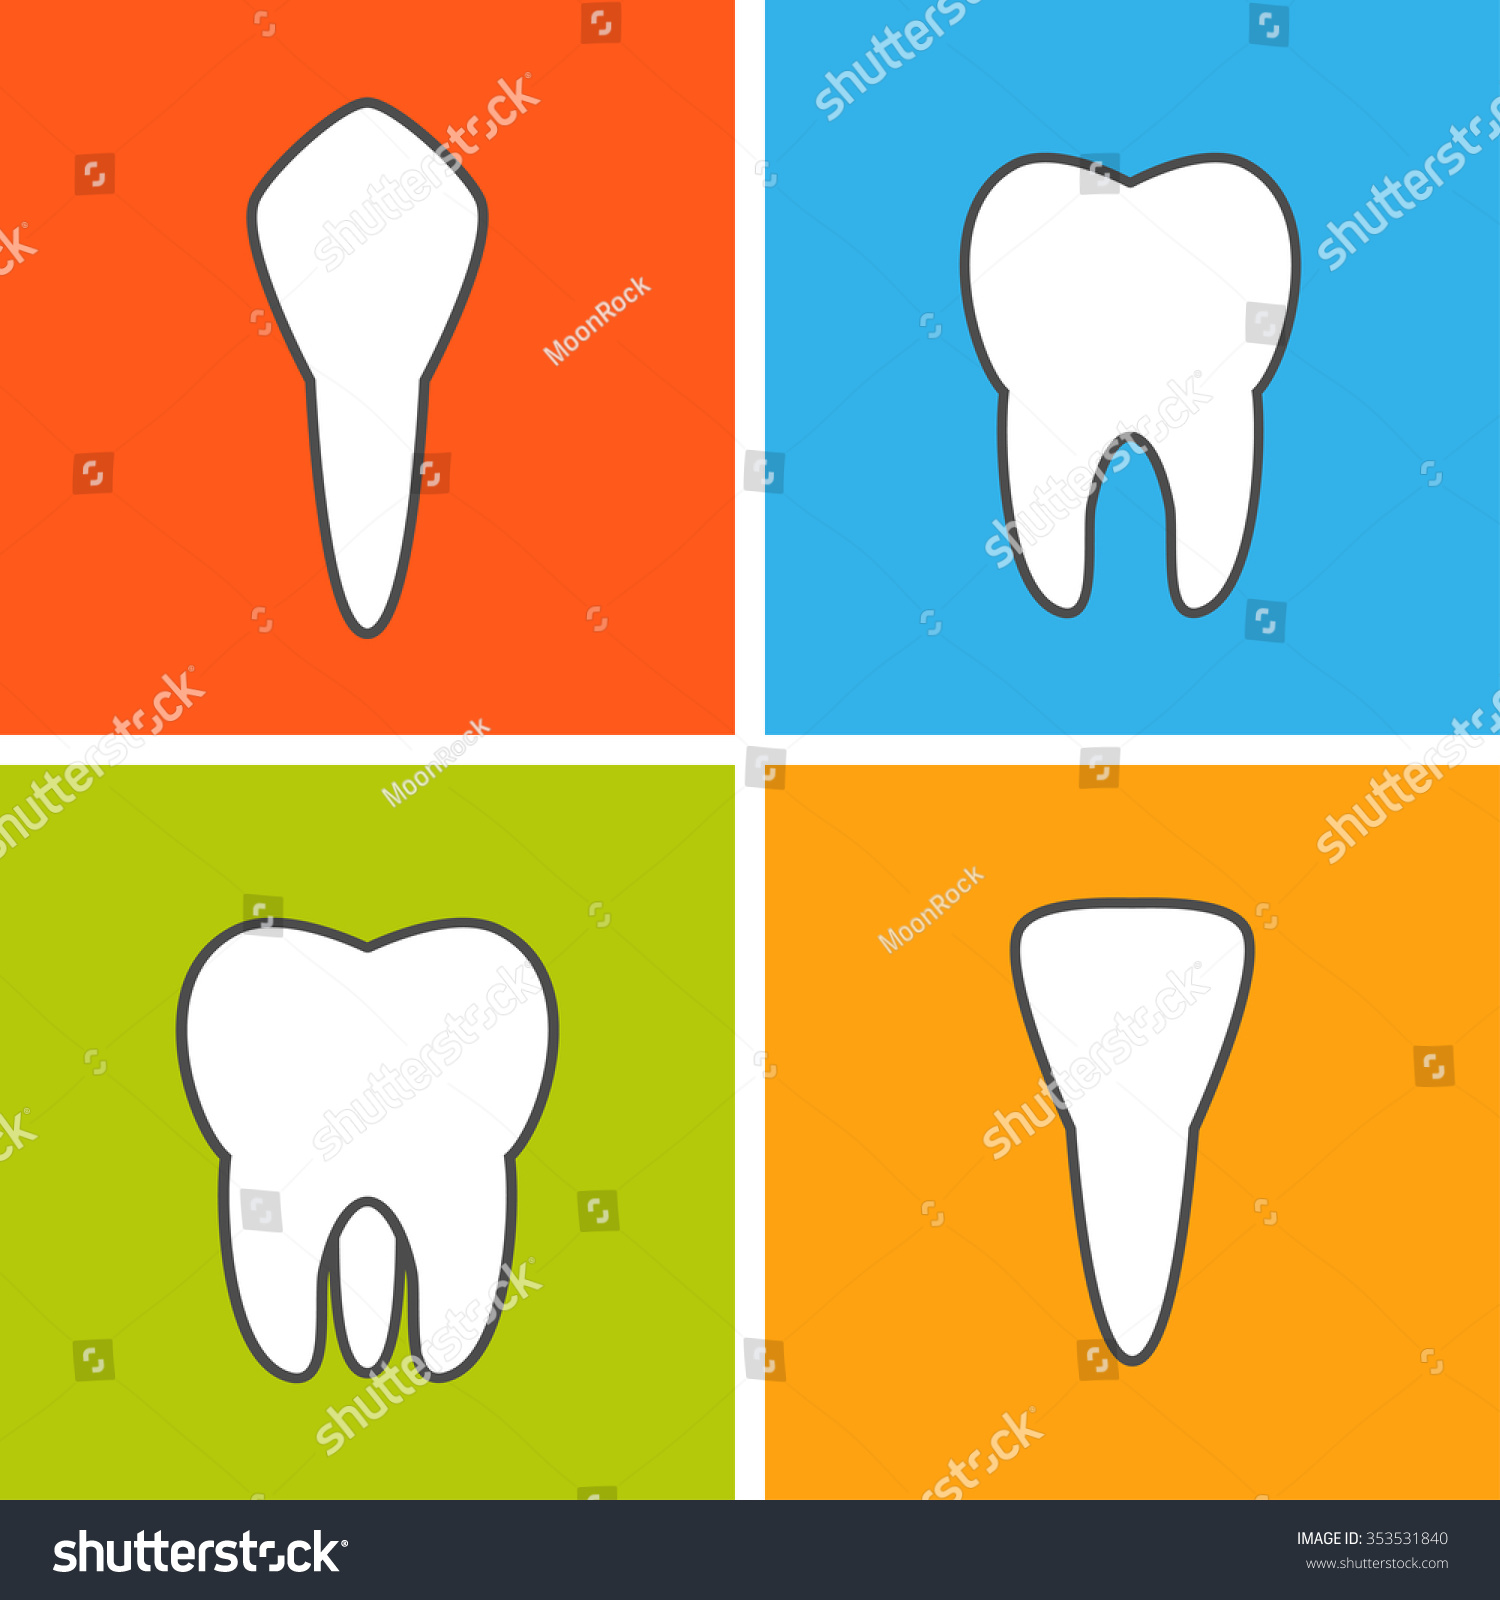 clip art canine tooth - photo #5